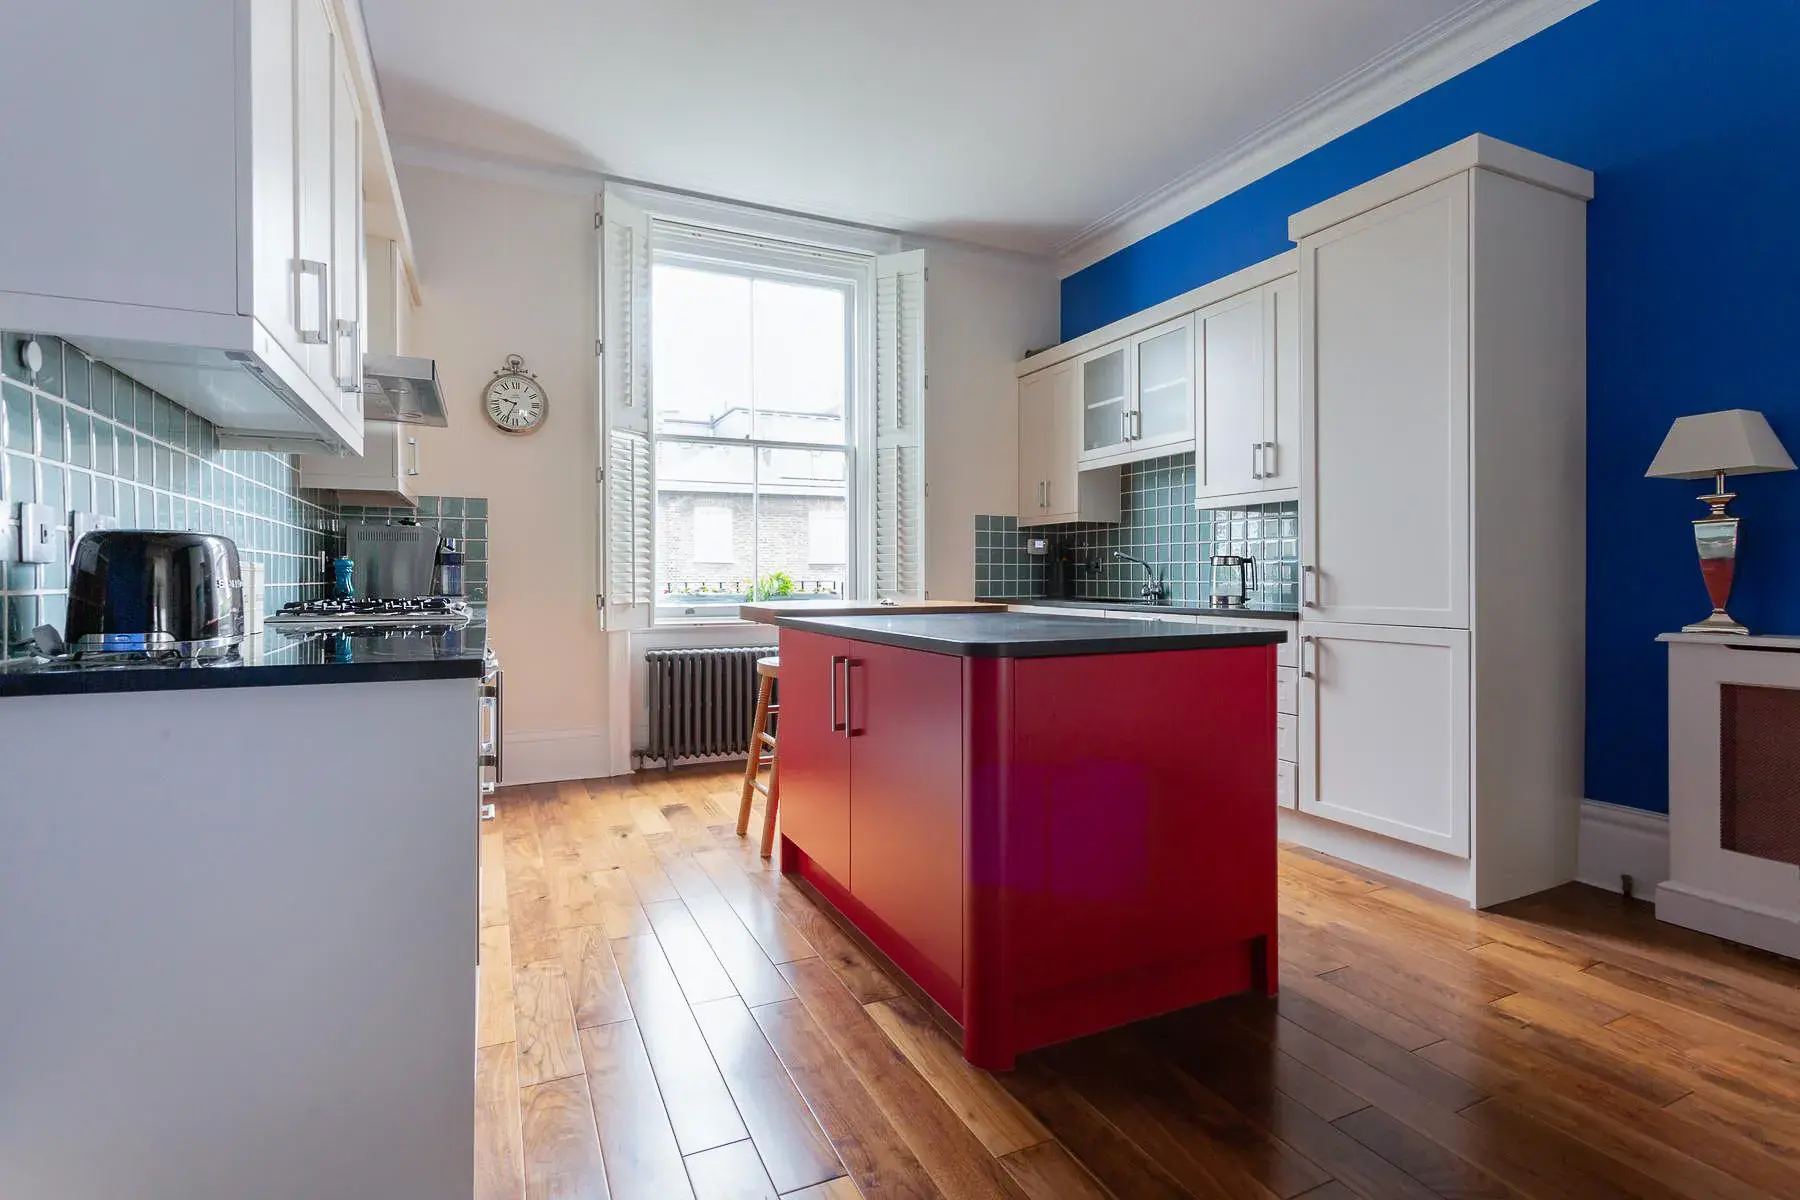 Stafford Terrace , holiday home in Kensington, London